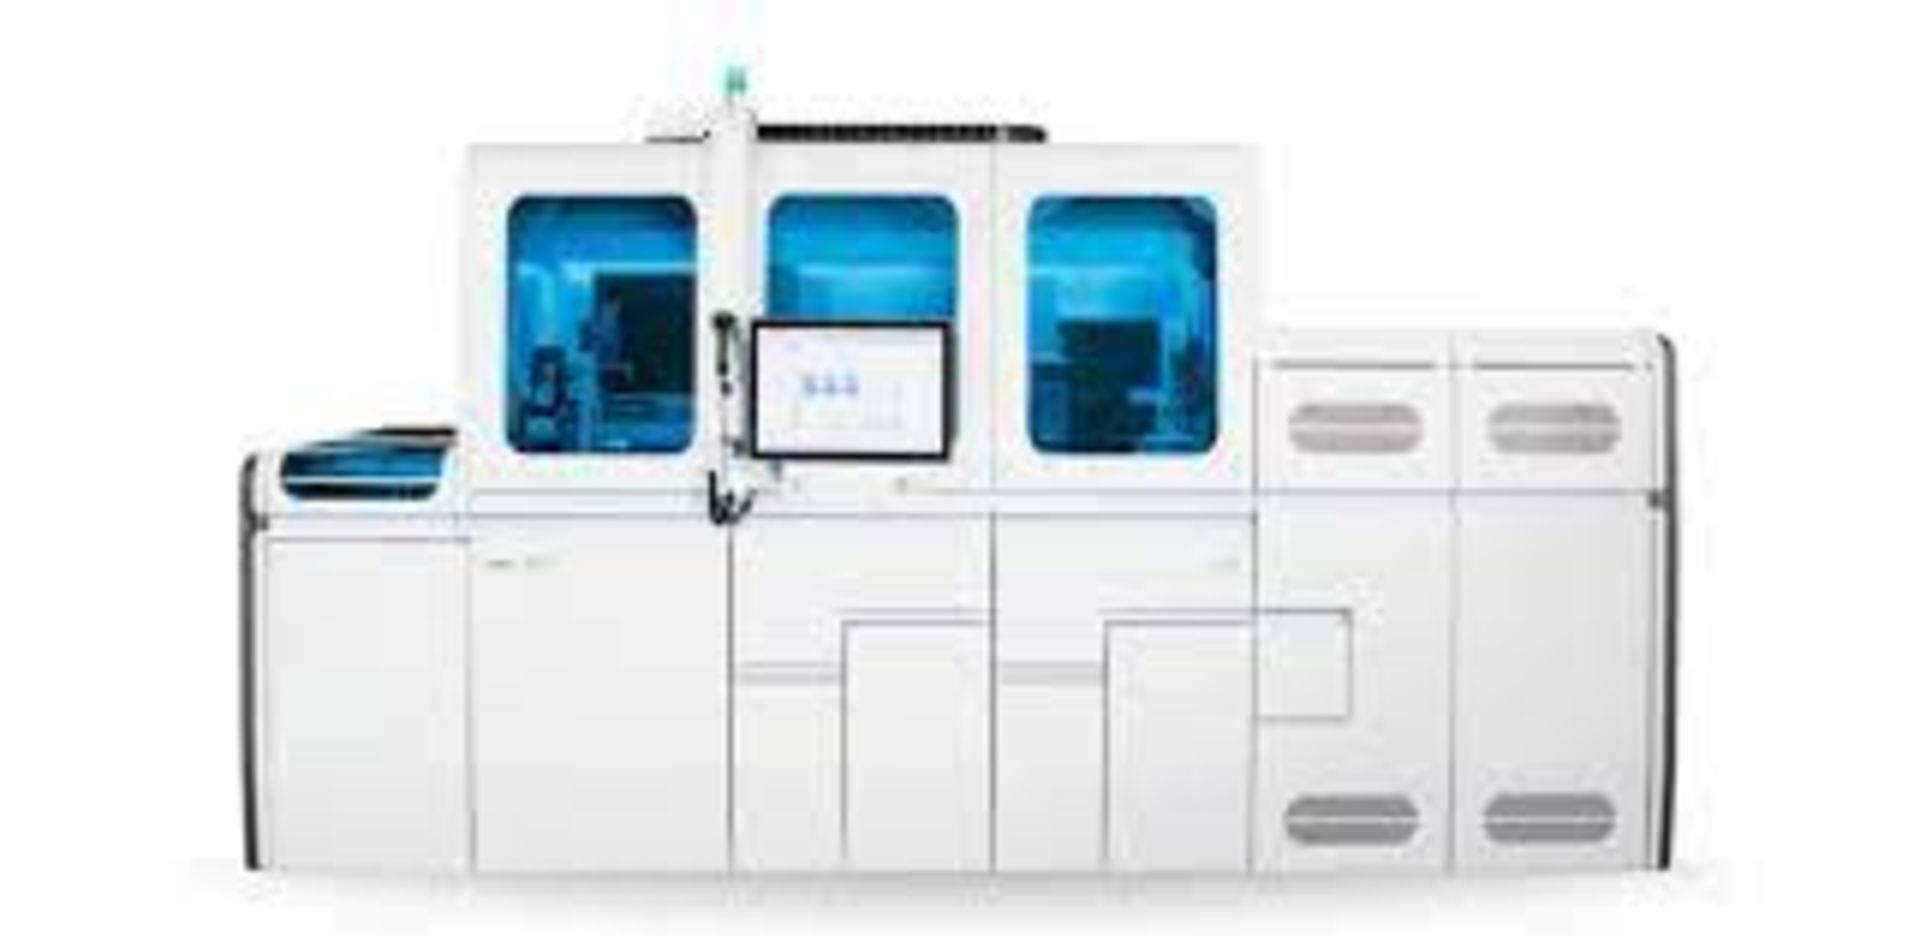 ROCHE DIAGNOSTICS COBAS 8800 SYSTEM, NEVER BEEN USED. PRICE NEW 600K. The cobas® 8800 System